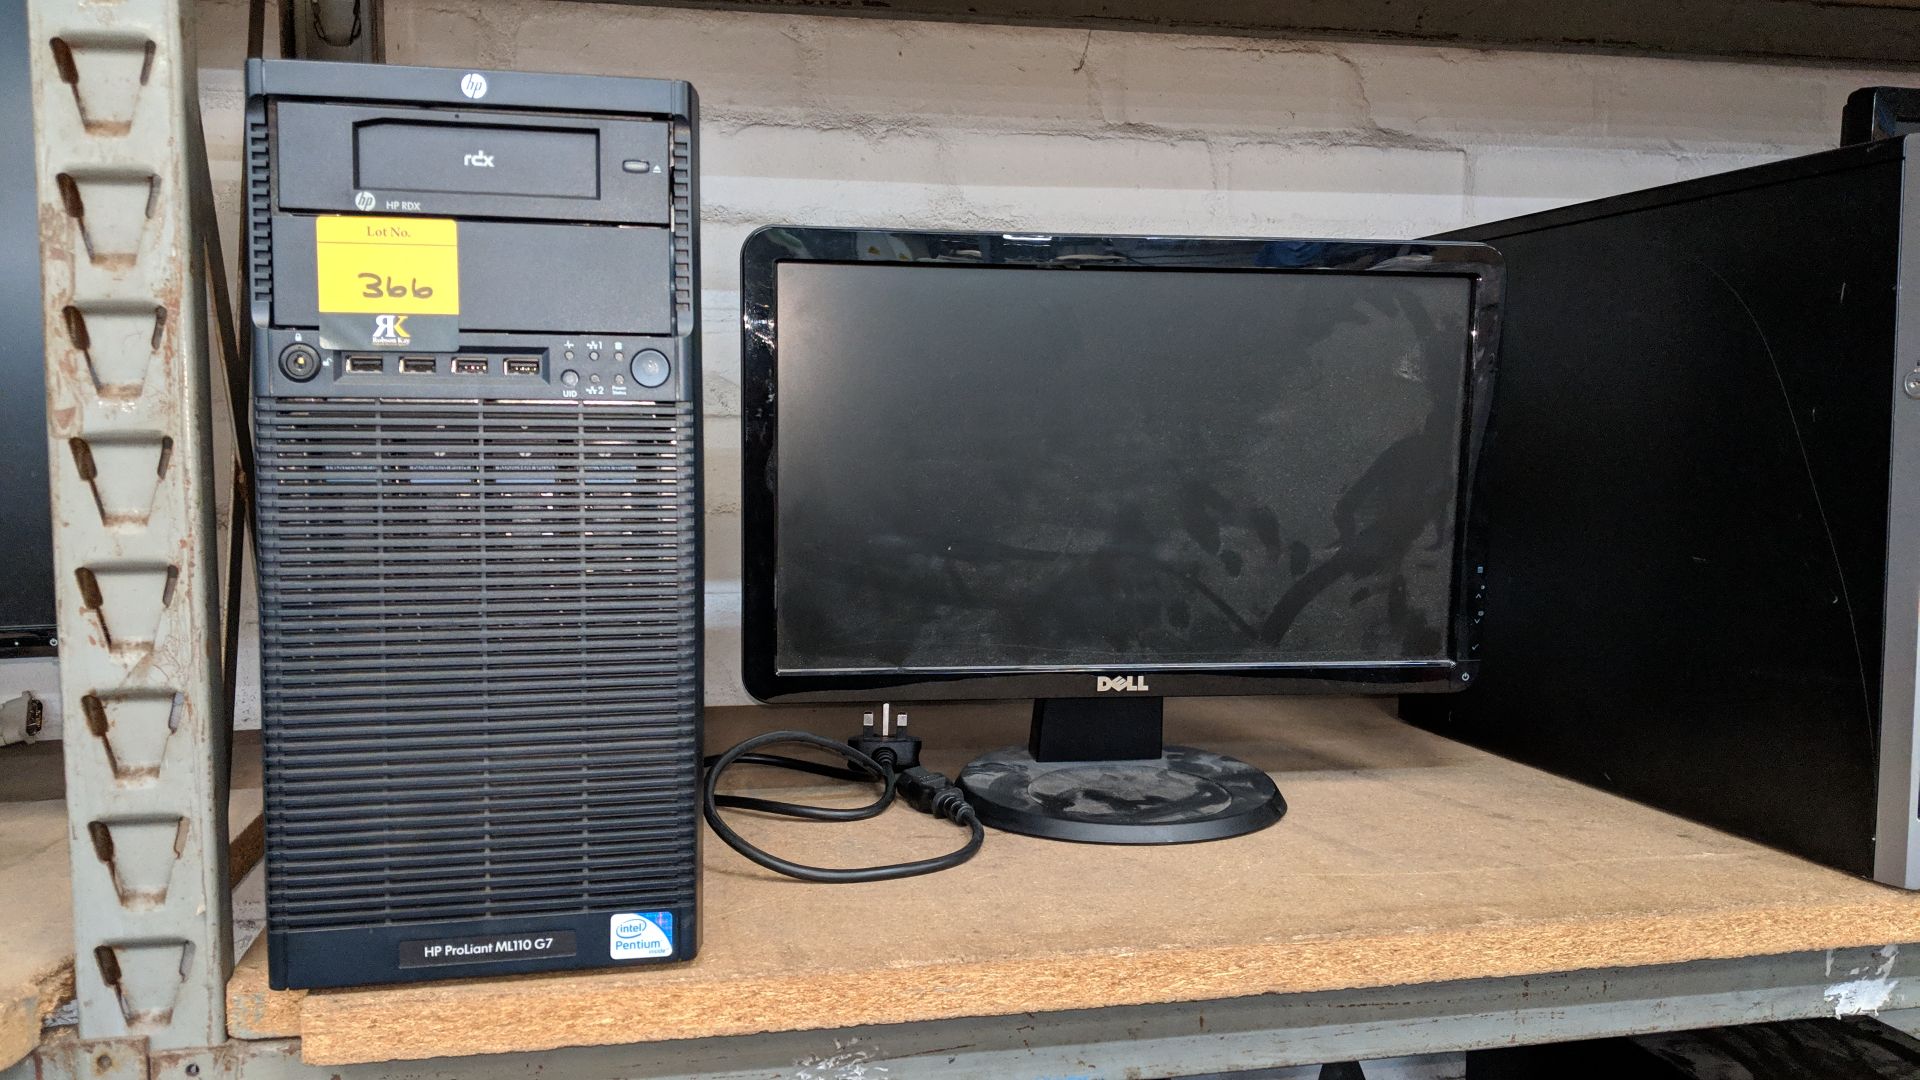 HP Proliant ML 110 G7 server with HP RDX backup drive and Dell widescreen monitor This lot is one of - Image 2 of 3